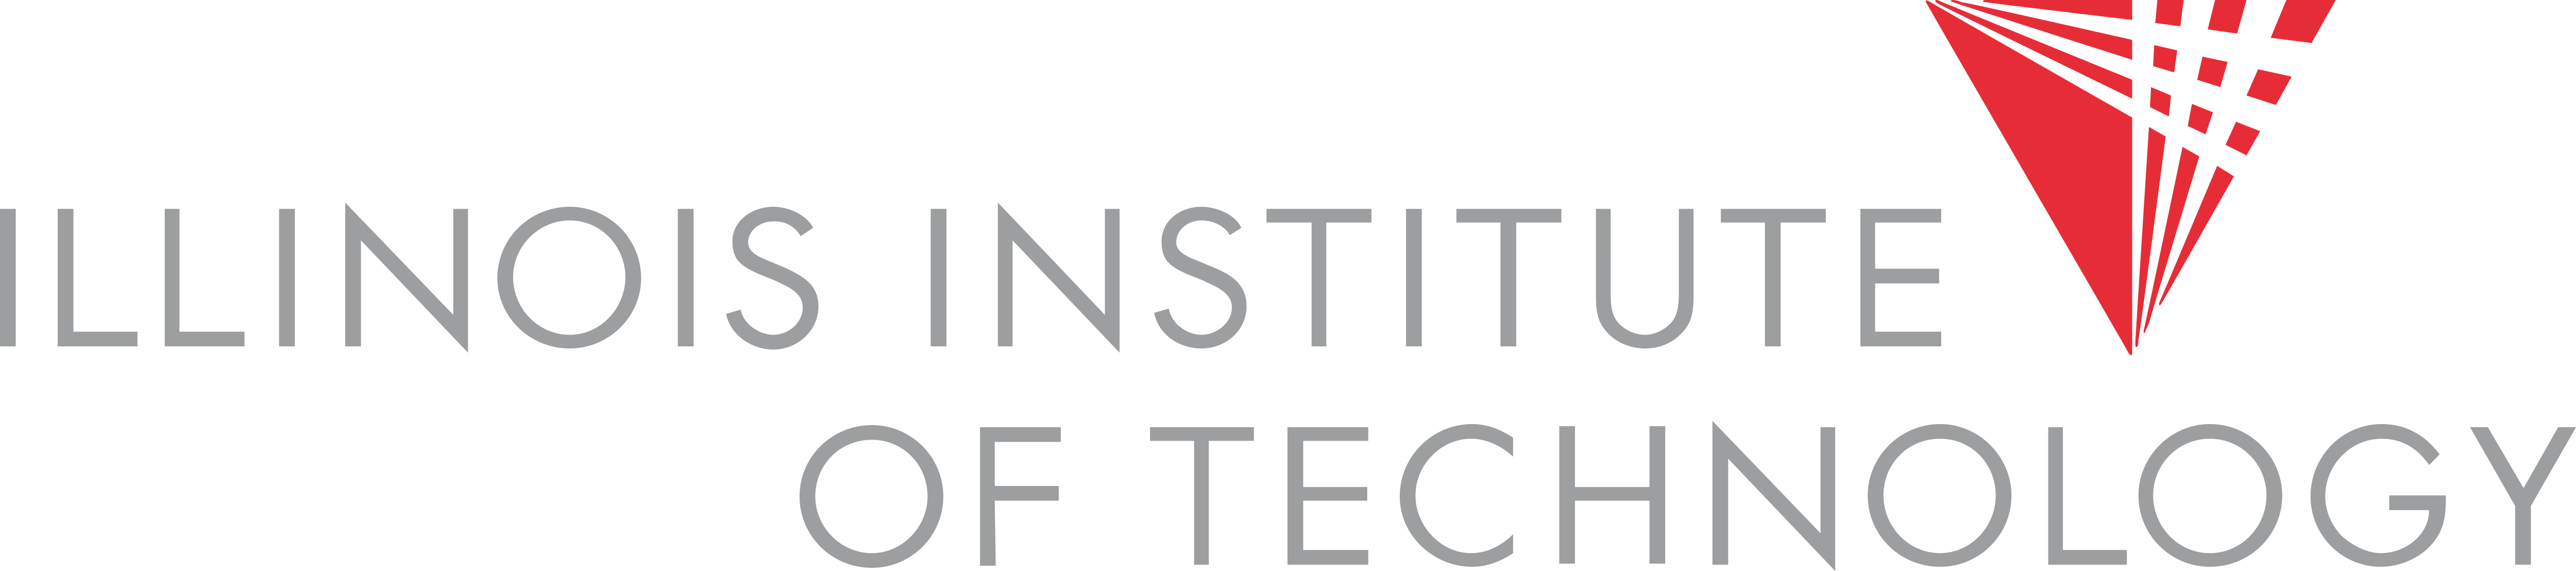 Illinois Institute of Technology – Logos Download